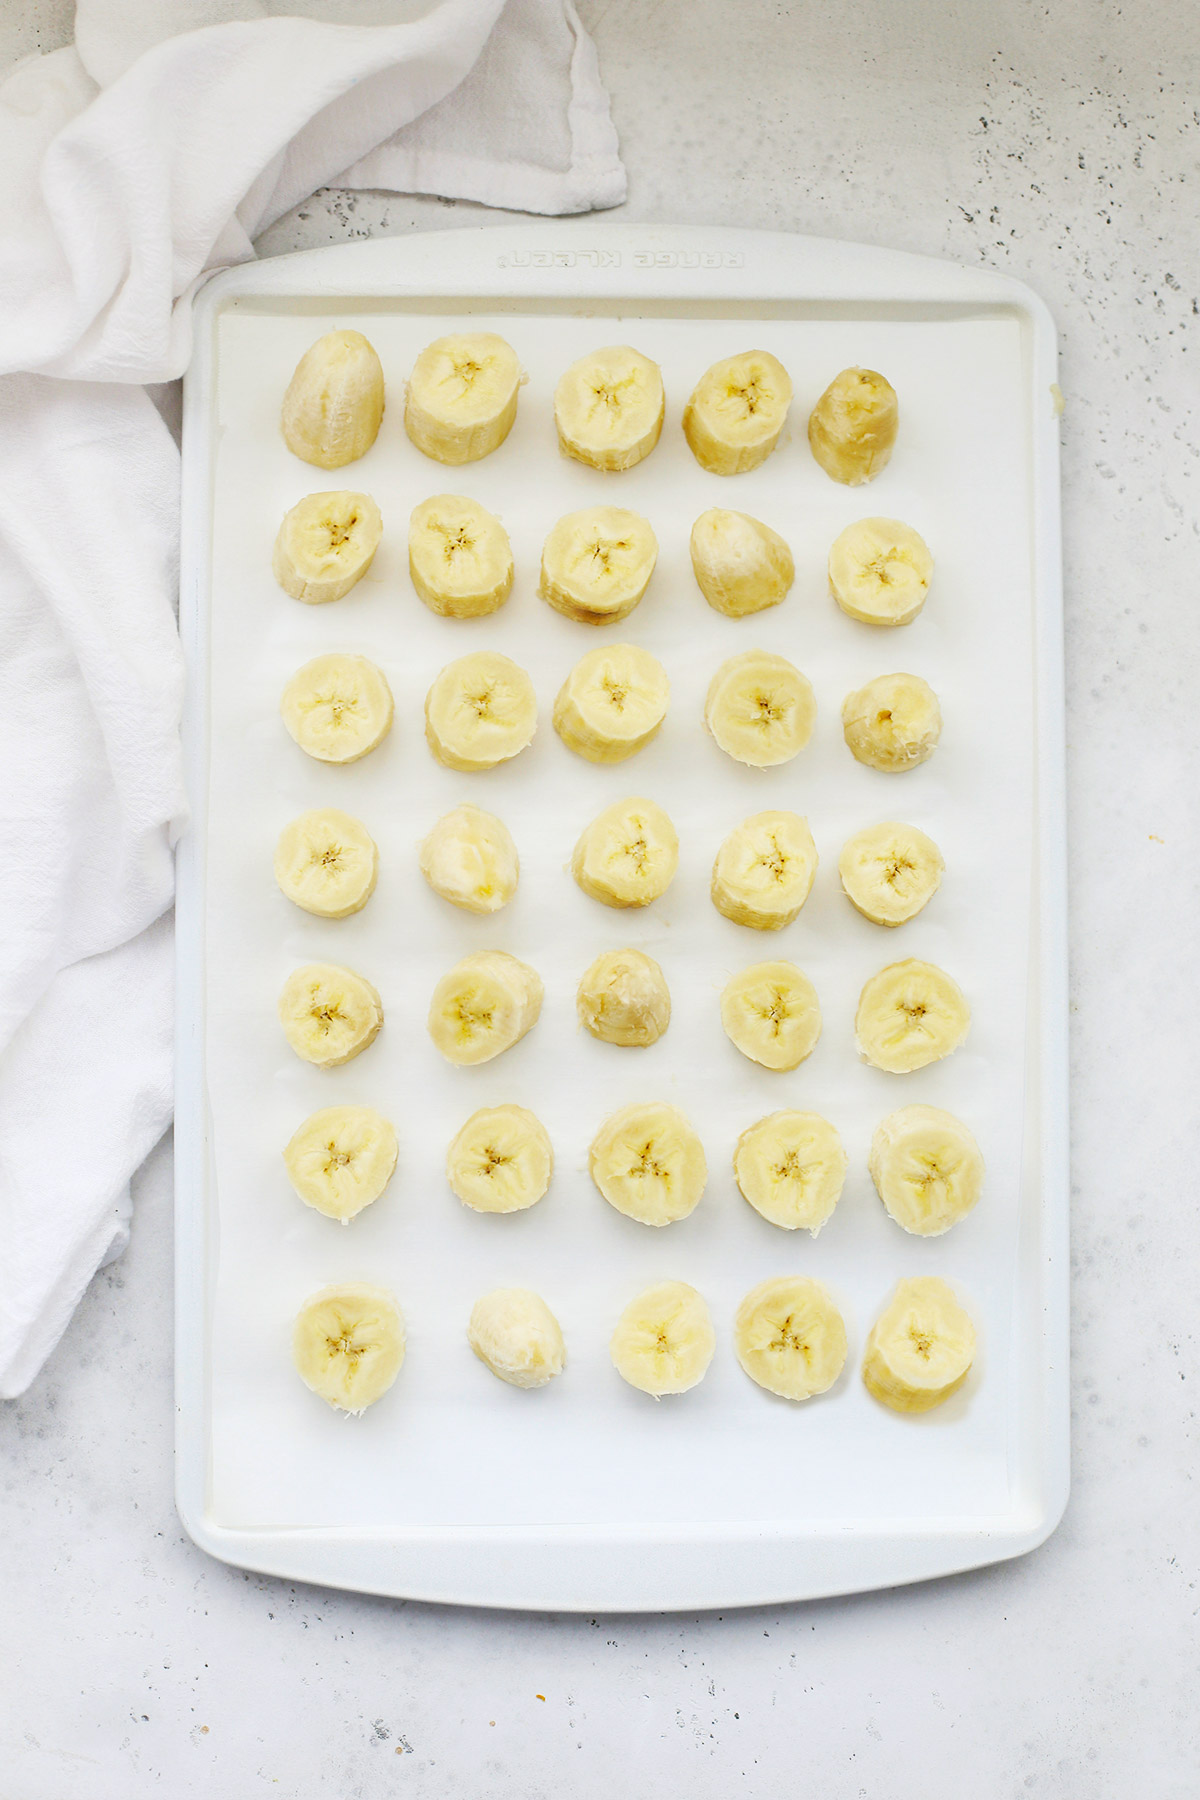 How to Freeze Bananas tutorial from One Lovely Life